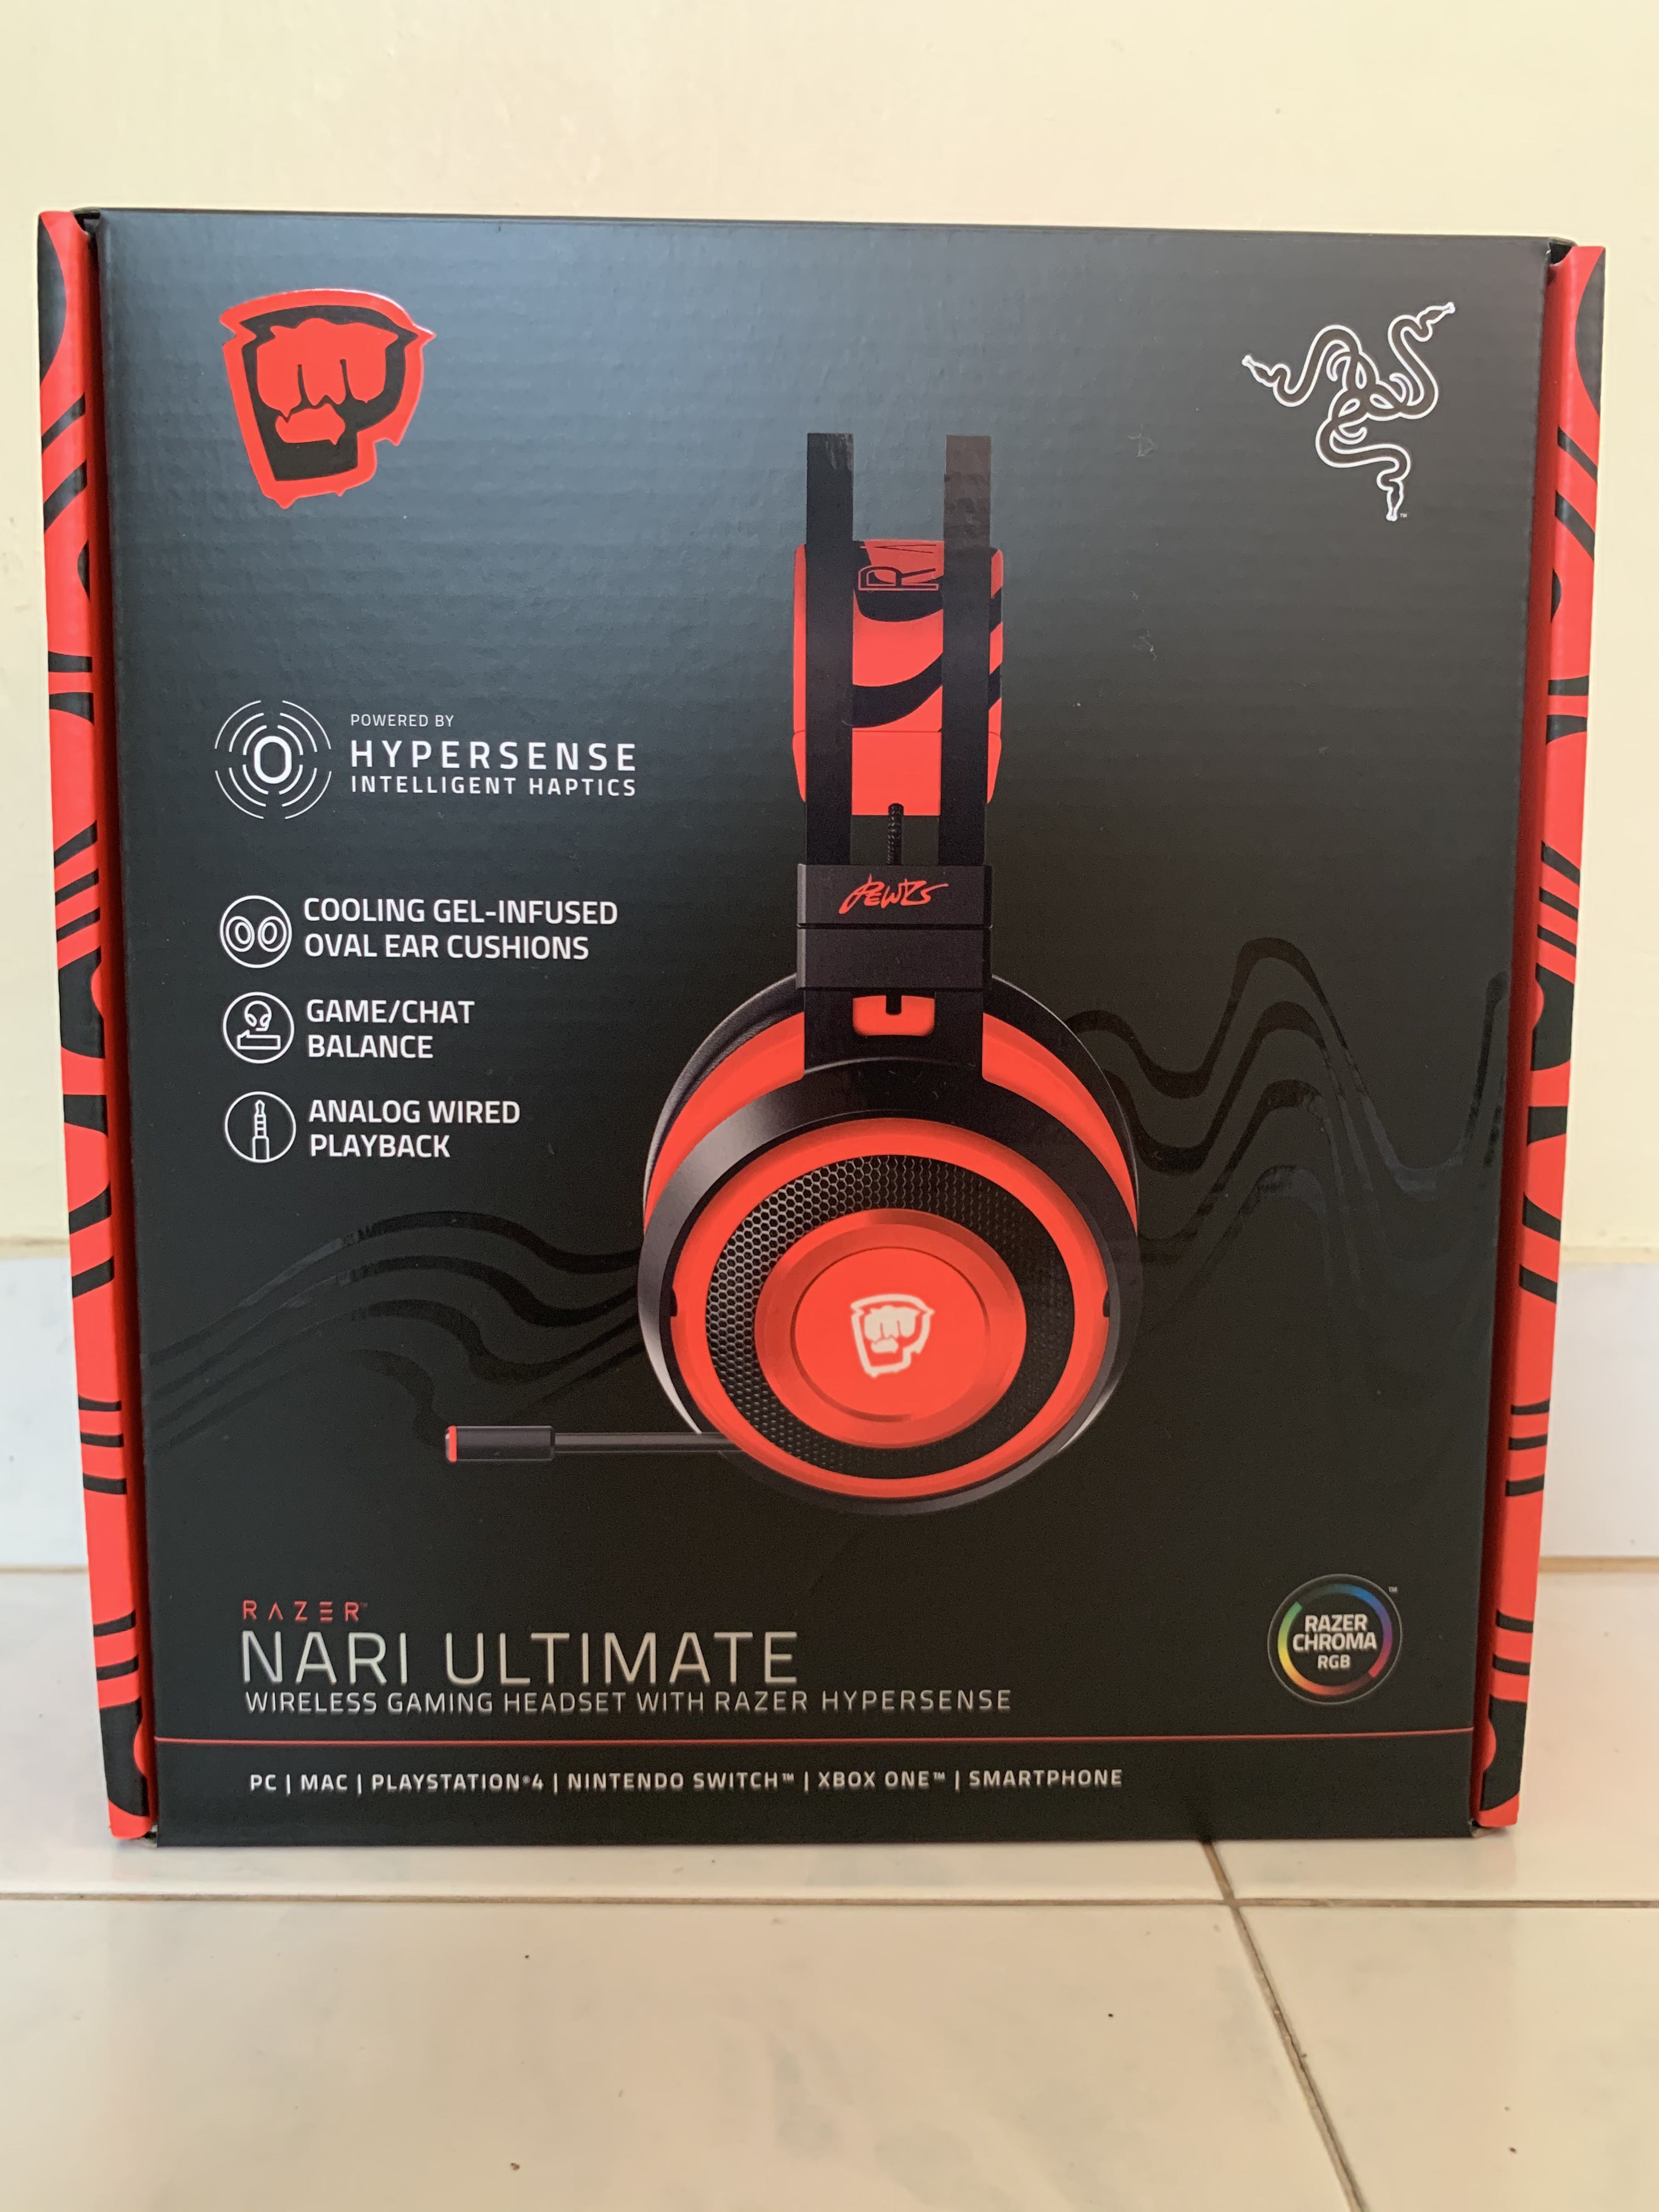 Bn Razer Nari Ultimate Wireless 7 1 Surround Sound Gaming Headset Pewdiepie Limited Edition Audio Headphones Headsets On Carousell